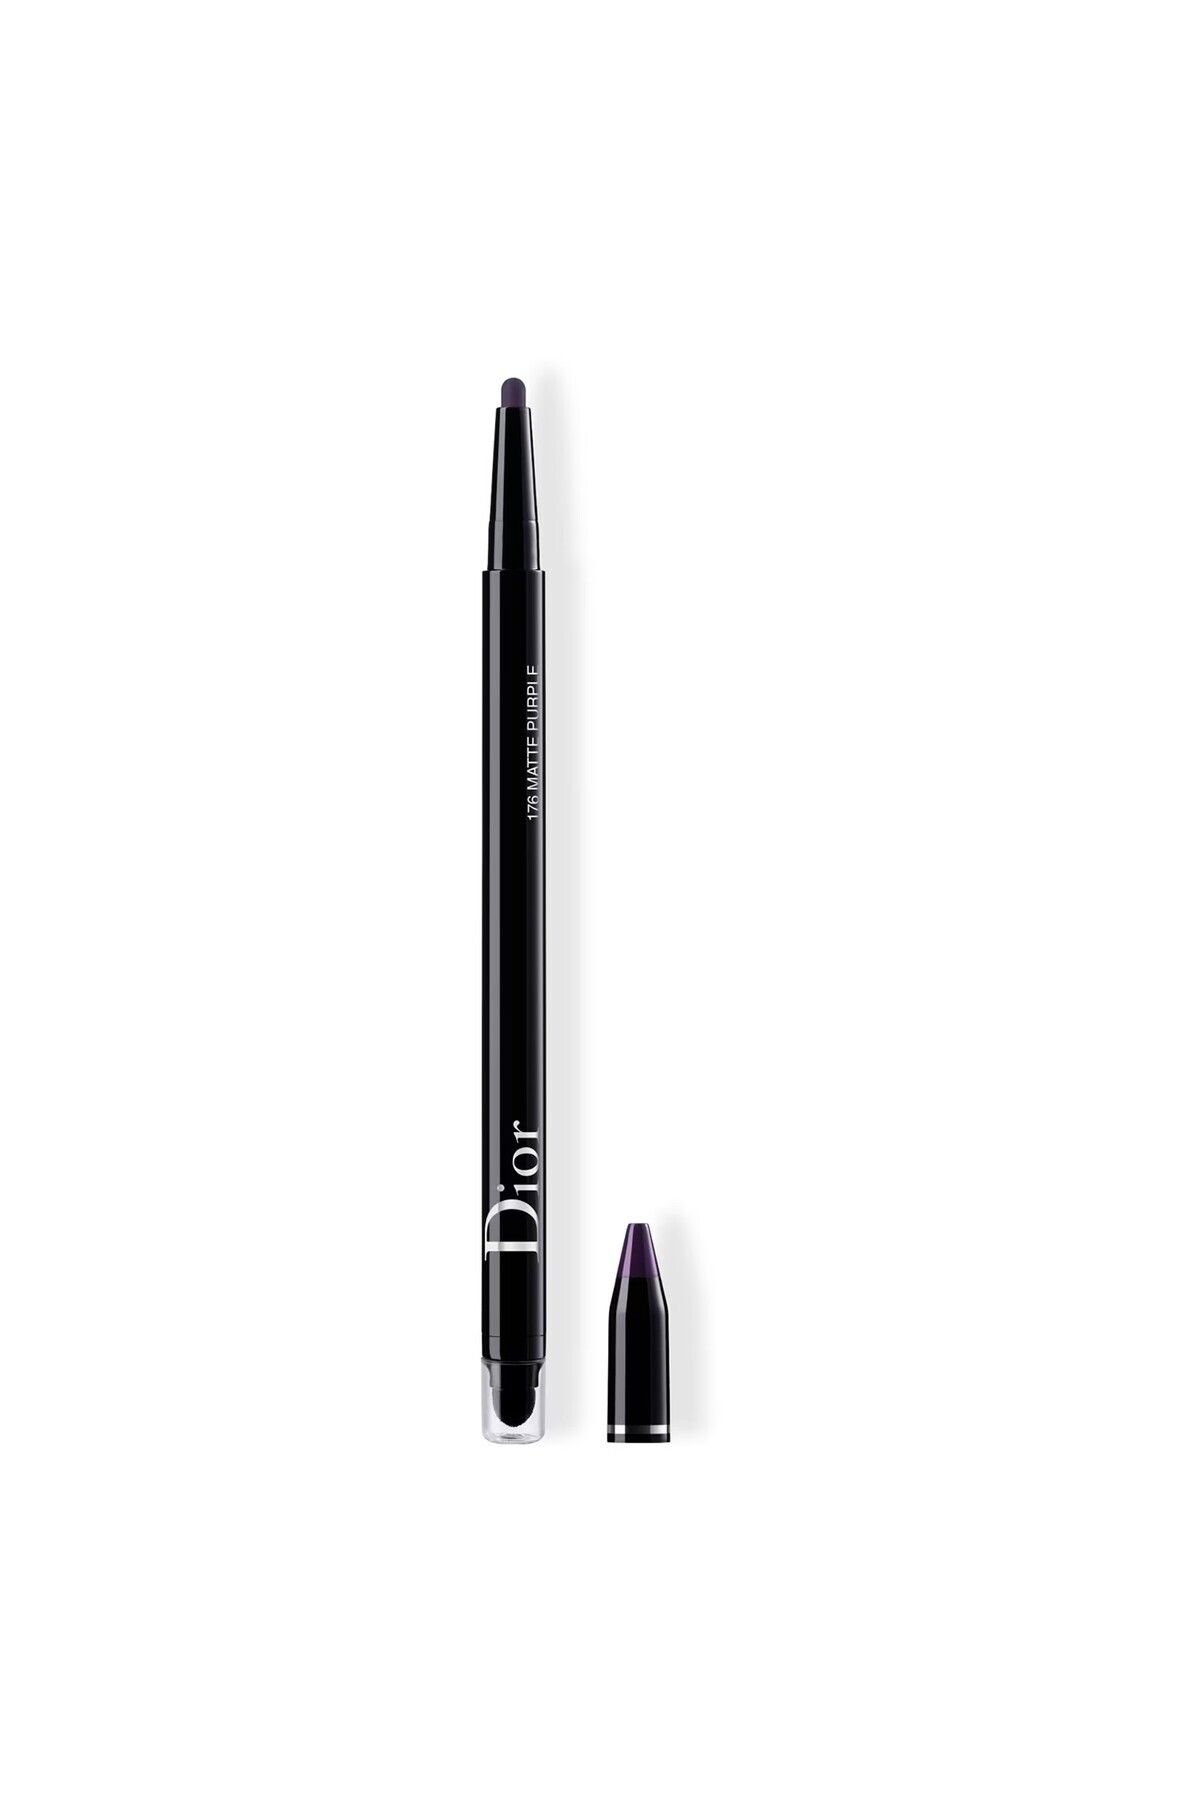 Dior 24H*STYLO WATERPROOF -WEAR-LASTİNG PROTECTİON FOR UP TO 24 HOURS, MATTE EYELİNER PSSN1971